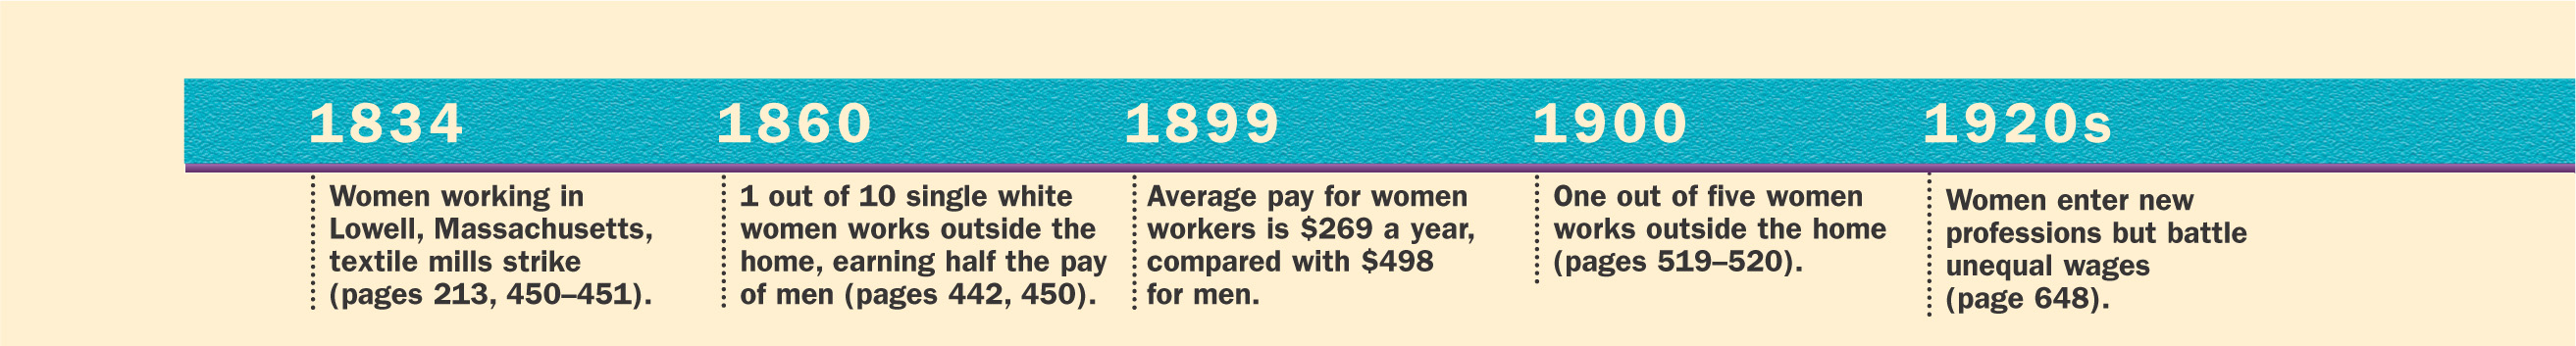 A timeline shows events involving women in the workforce in the U.S. from 1834 to 2005.